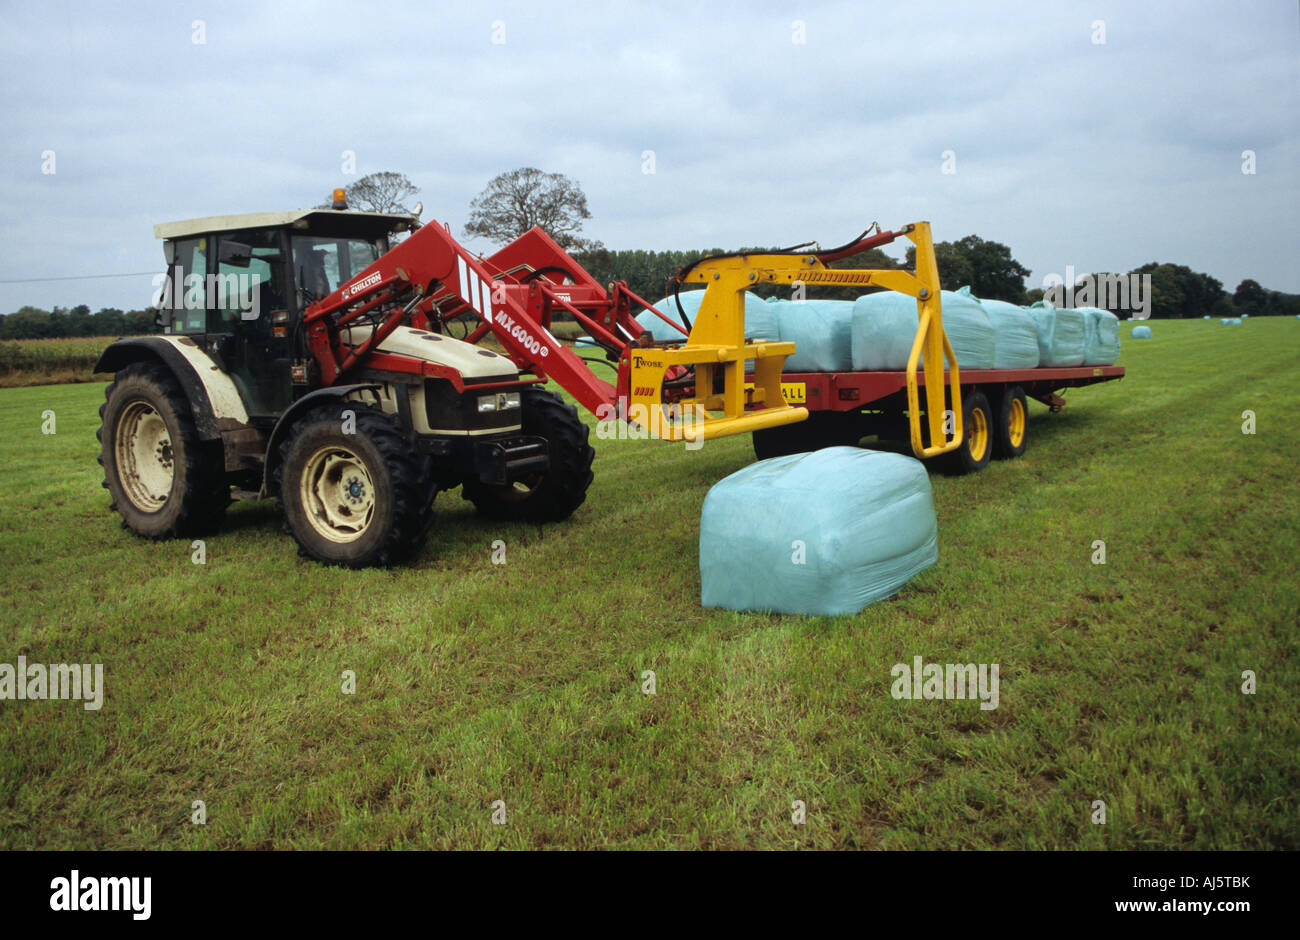 Farmer Placing Plastic Covered Hay Bales On The Back Of A Trailer Using A Tractor Stock Photo